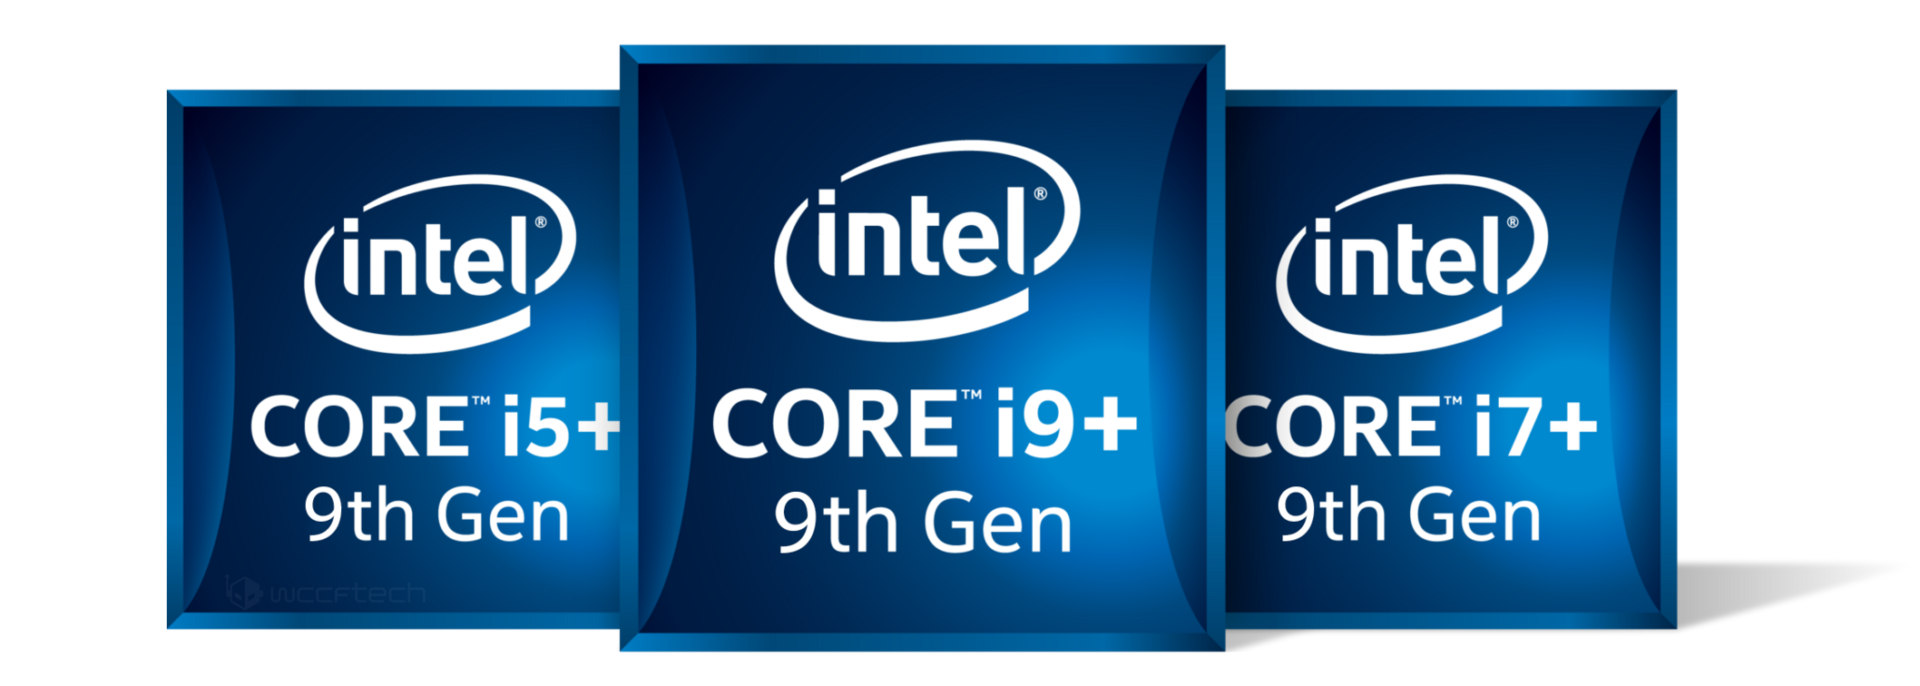 Intel S New Coffee Lake Refresh Cpus I9 9900kf I7 9700kf I5 9600kf I5 9400f Briefly Listed On Major Retailers Sites Notebookcheck Net News